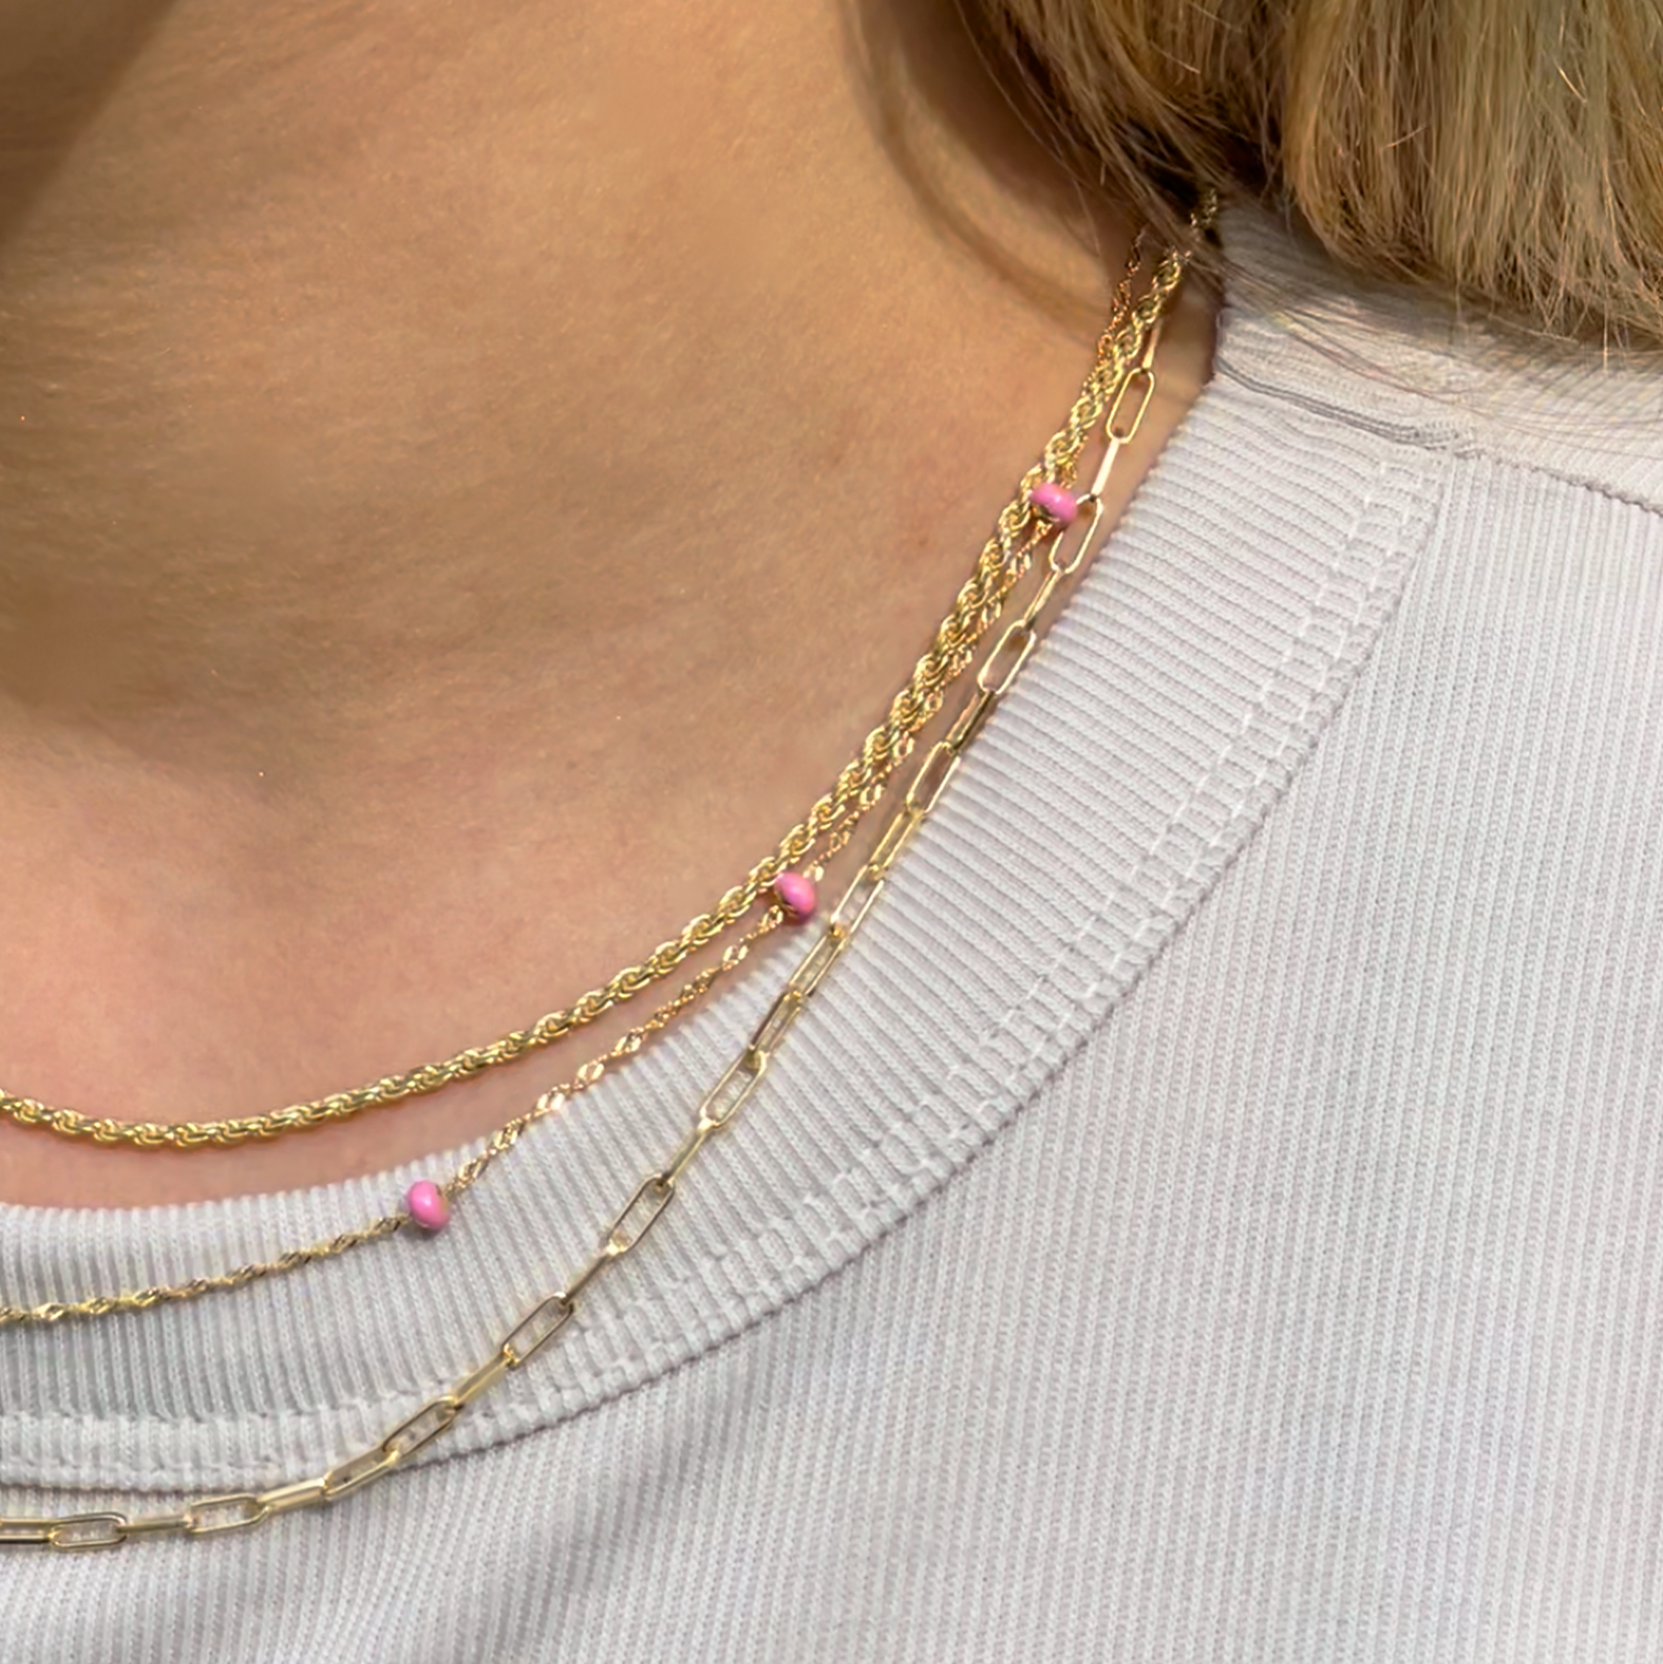 THE PINK BALL CHAIN NECKLACE